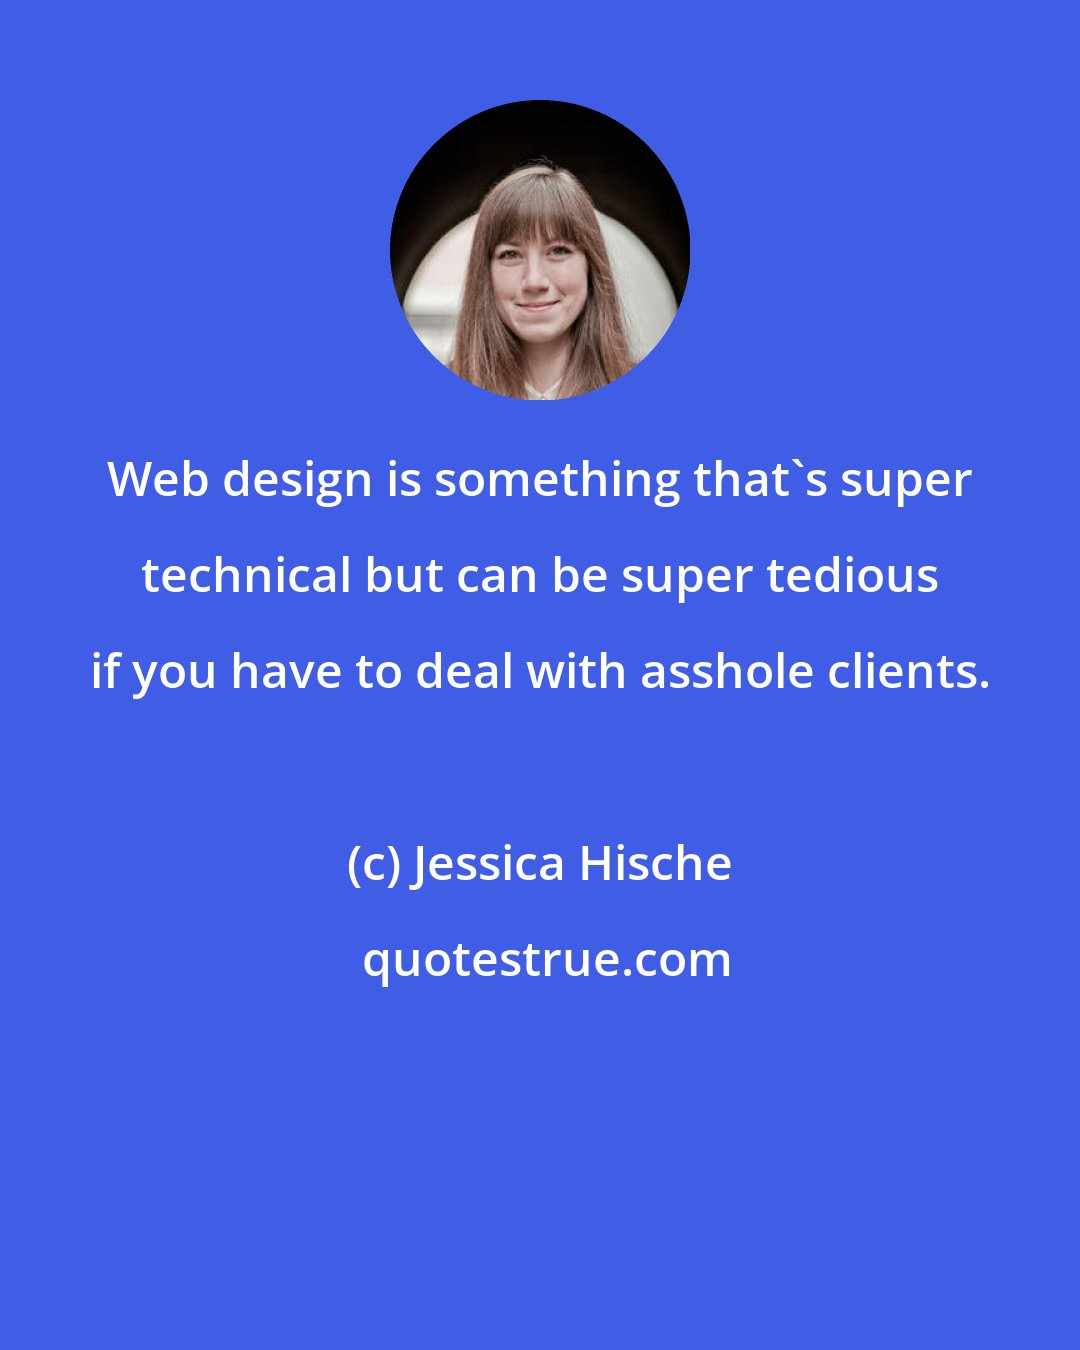 Jessica Hische: Web design is something that's super technical but can be super tedious if you have to deal with asshole clients.